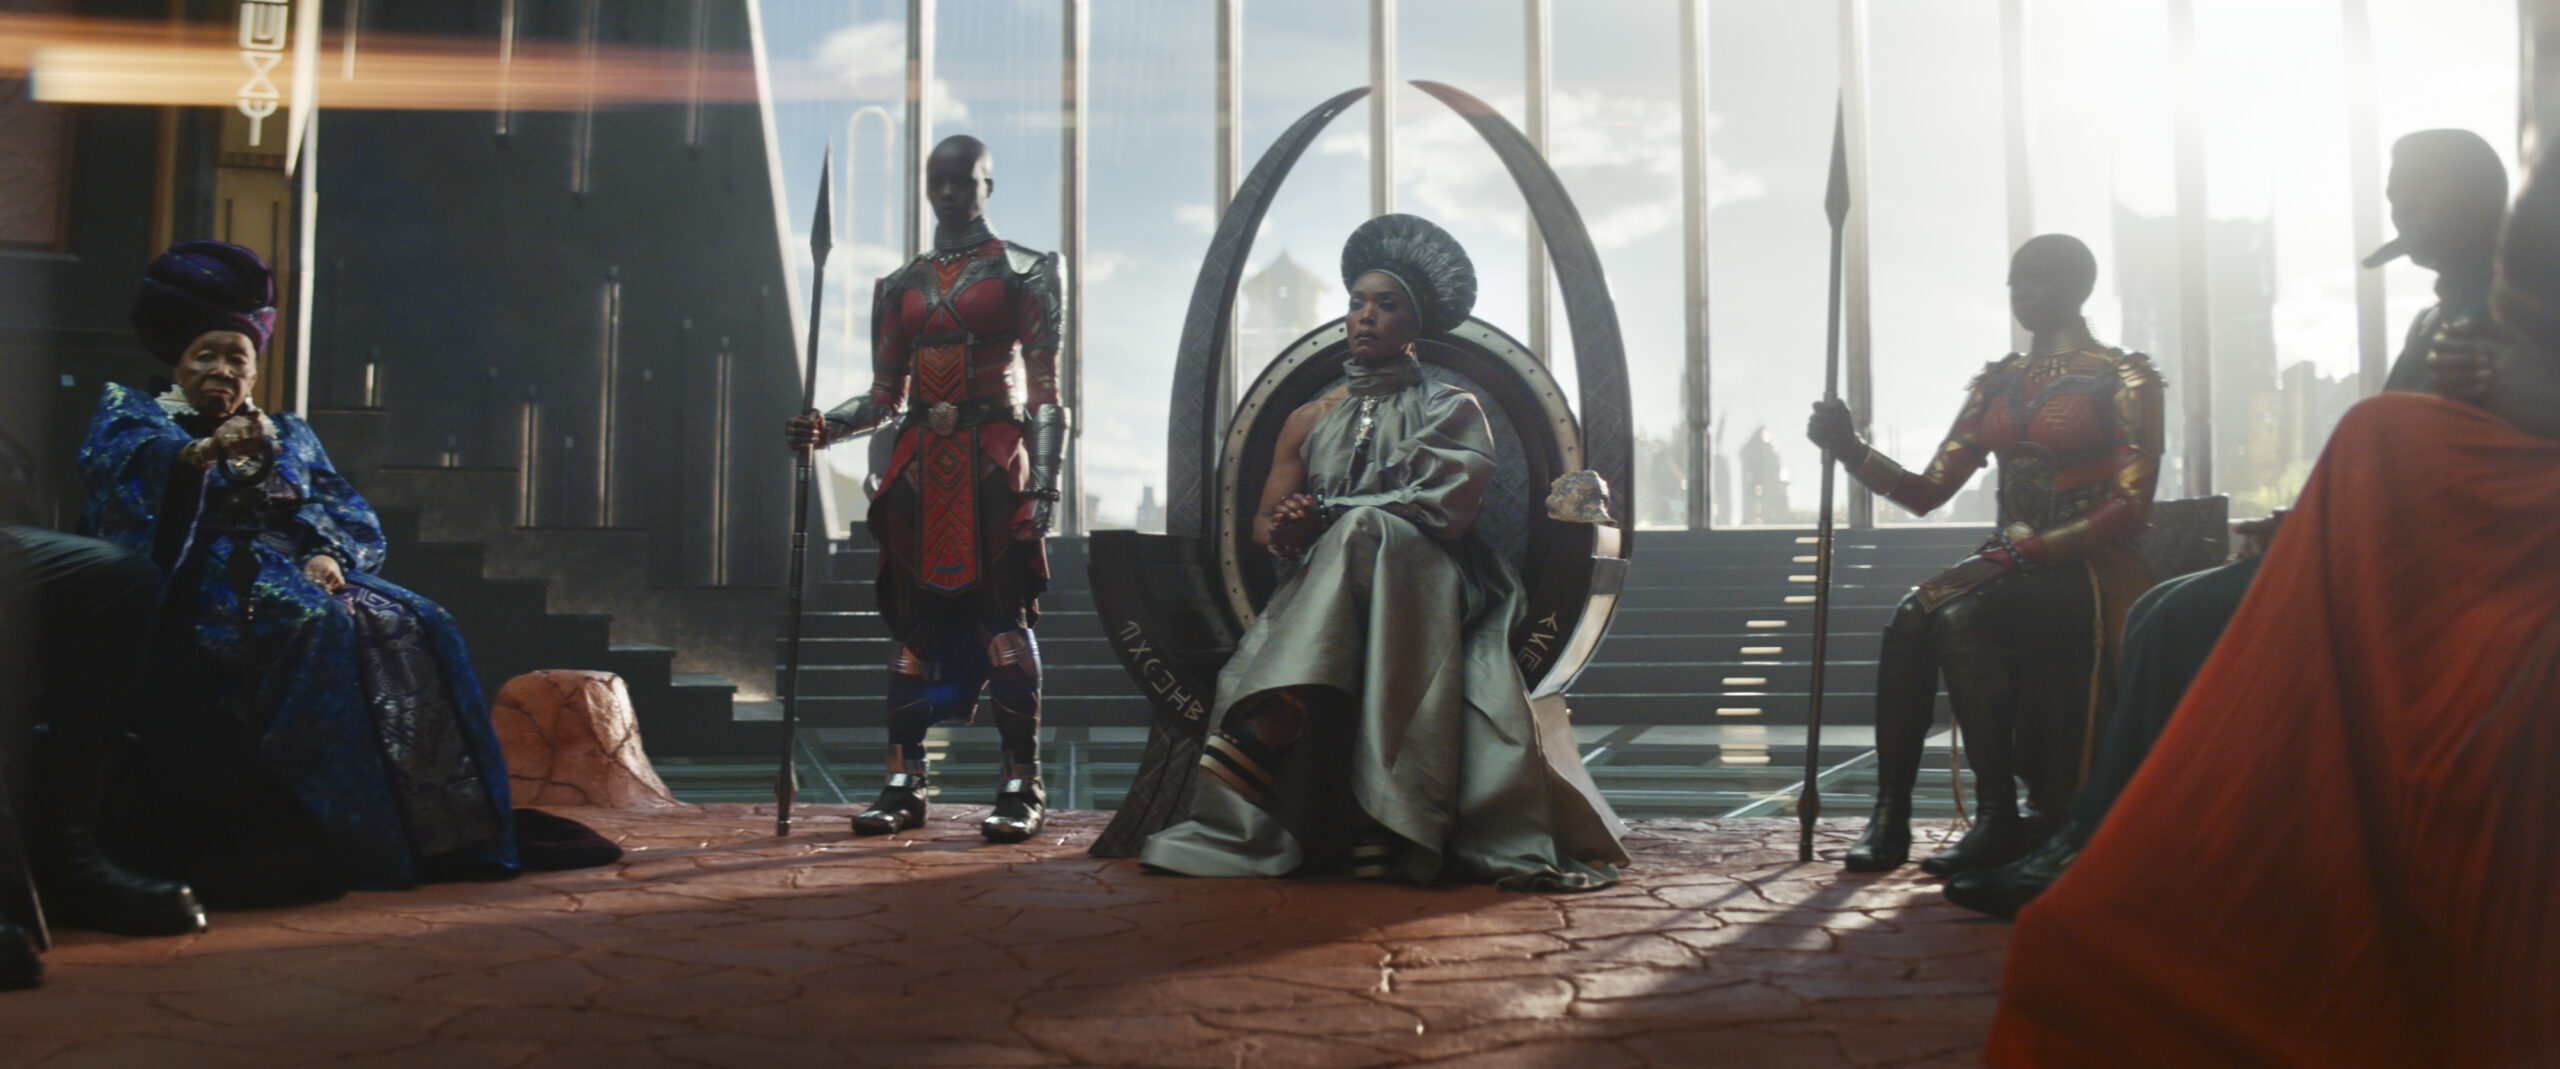 Black Panther: Wakanda Forever runtime revealed and it's a fairly long movie compared to most MCU shows outside of Avengers movies.